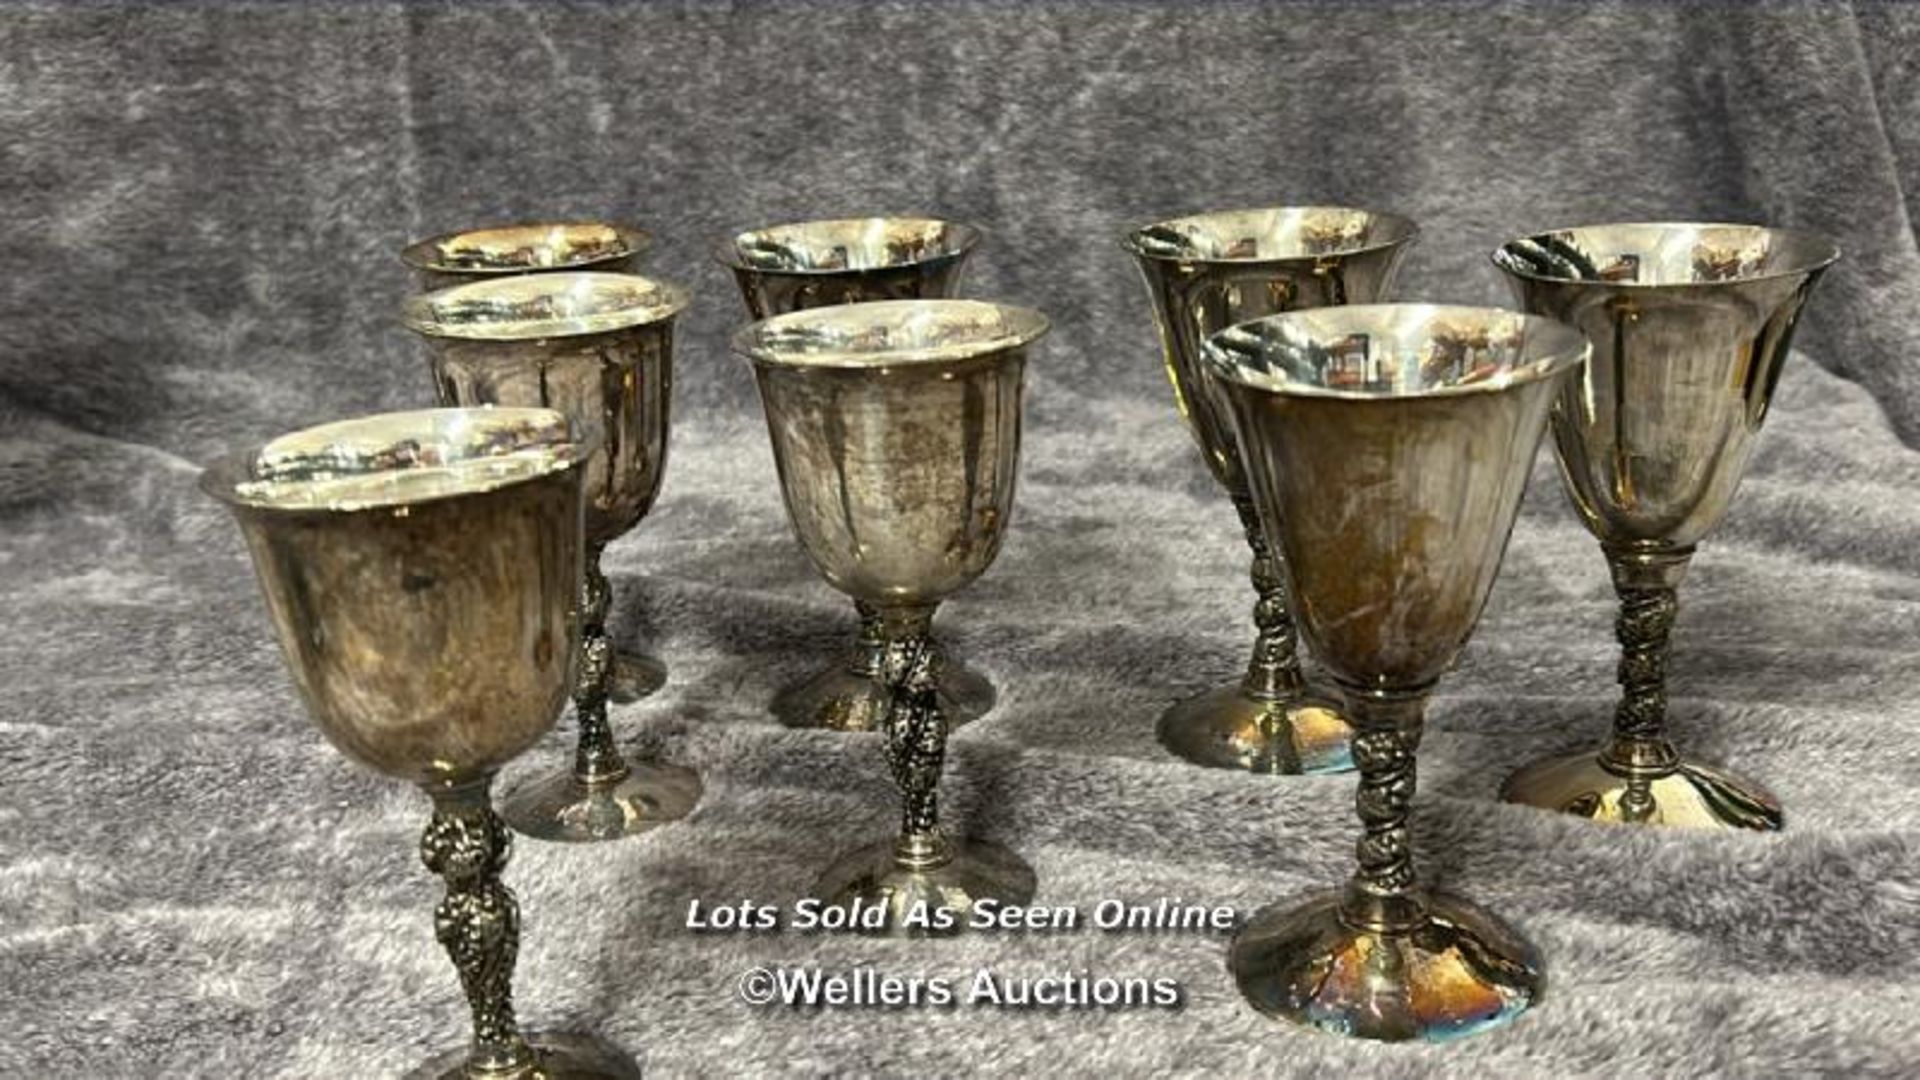 A large collection of antique metal plated items including a three armed candelabra, goblets, - Image 4 of 17